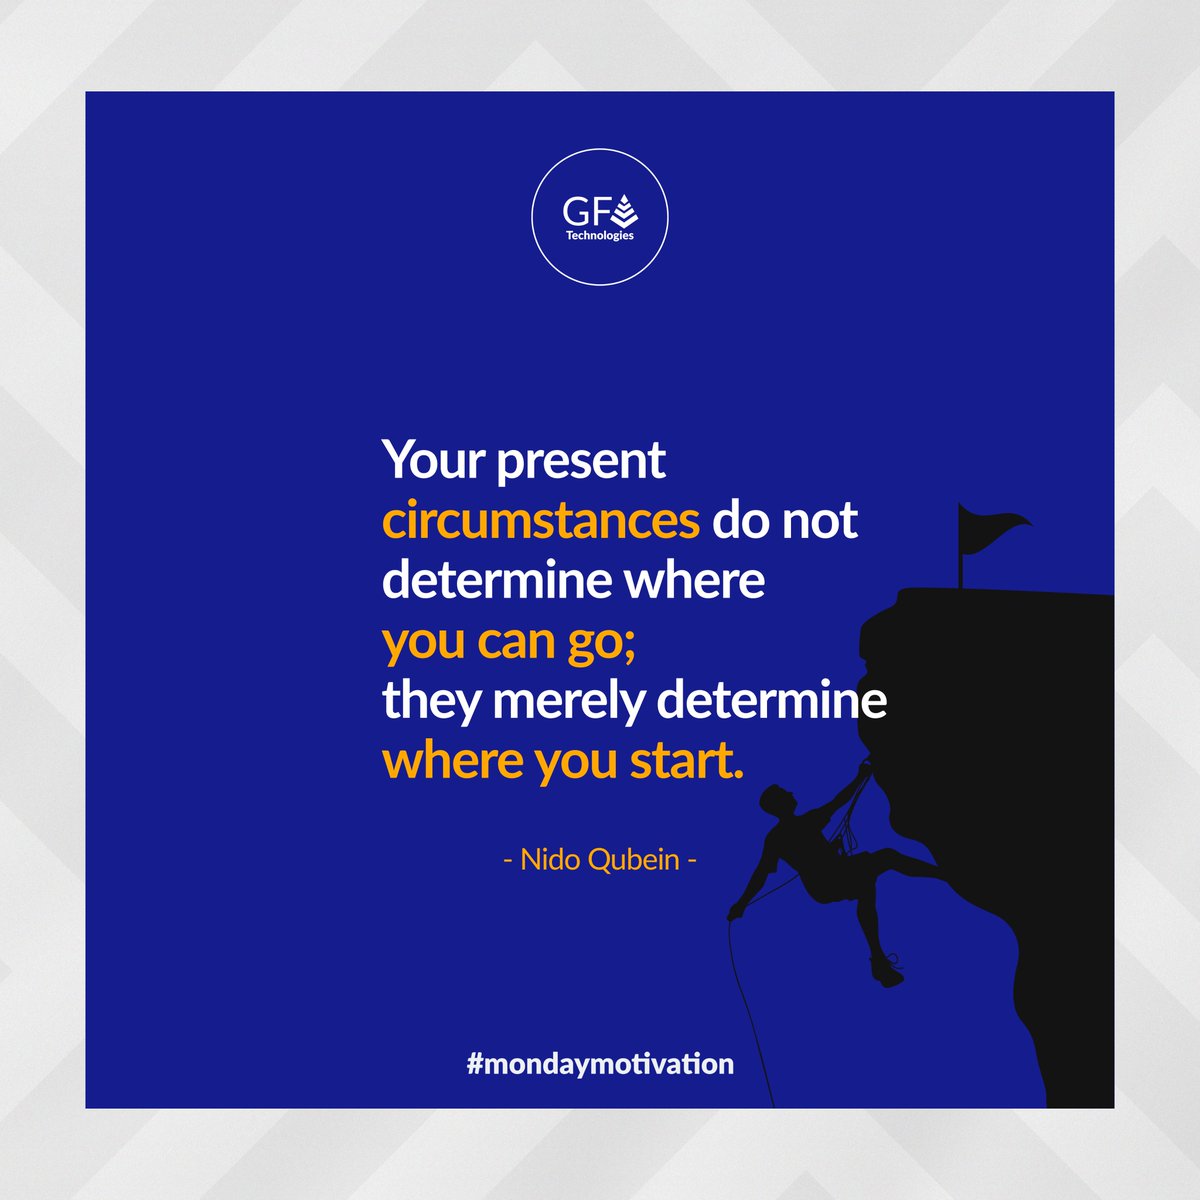 Your present circumstances are just the beginning, not the end. 

Embrace them as the starting point of your journey to success. Keep pushing forward, and you'll reach heights you never imagined. 

#Mondaymotivation #Keepgoing #Humblebeginnings